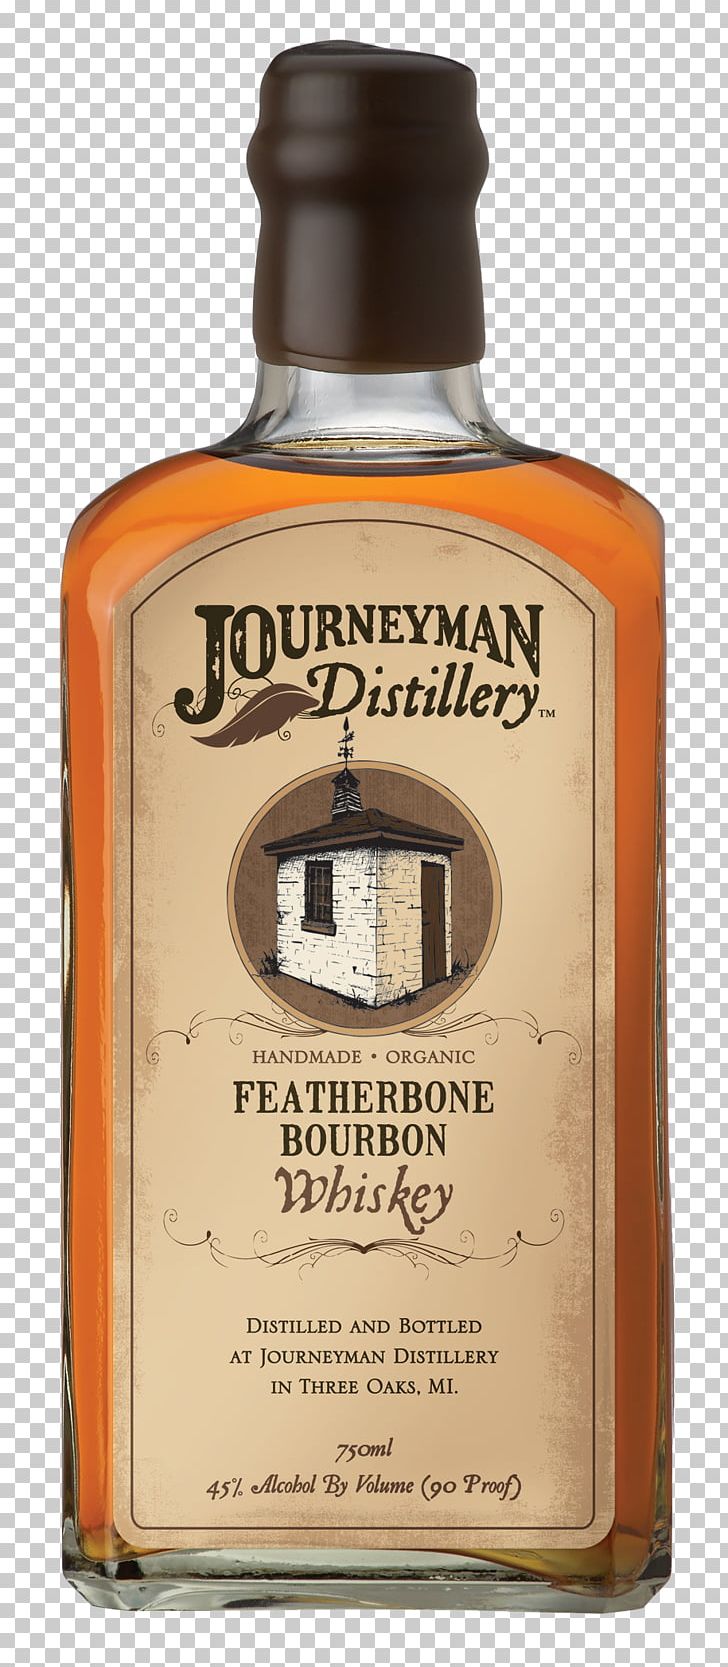 Journeyman Distillery Bourbon Whiskey Distillation Rye Whiskey PNG, Clipart, Alcoholic Beverage, Alcoholic Drink, Bottle, Bourbon, Bourbon Whiskey Free PNG Download